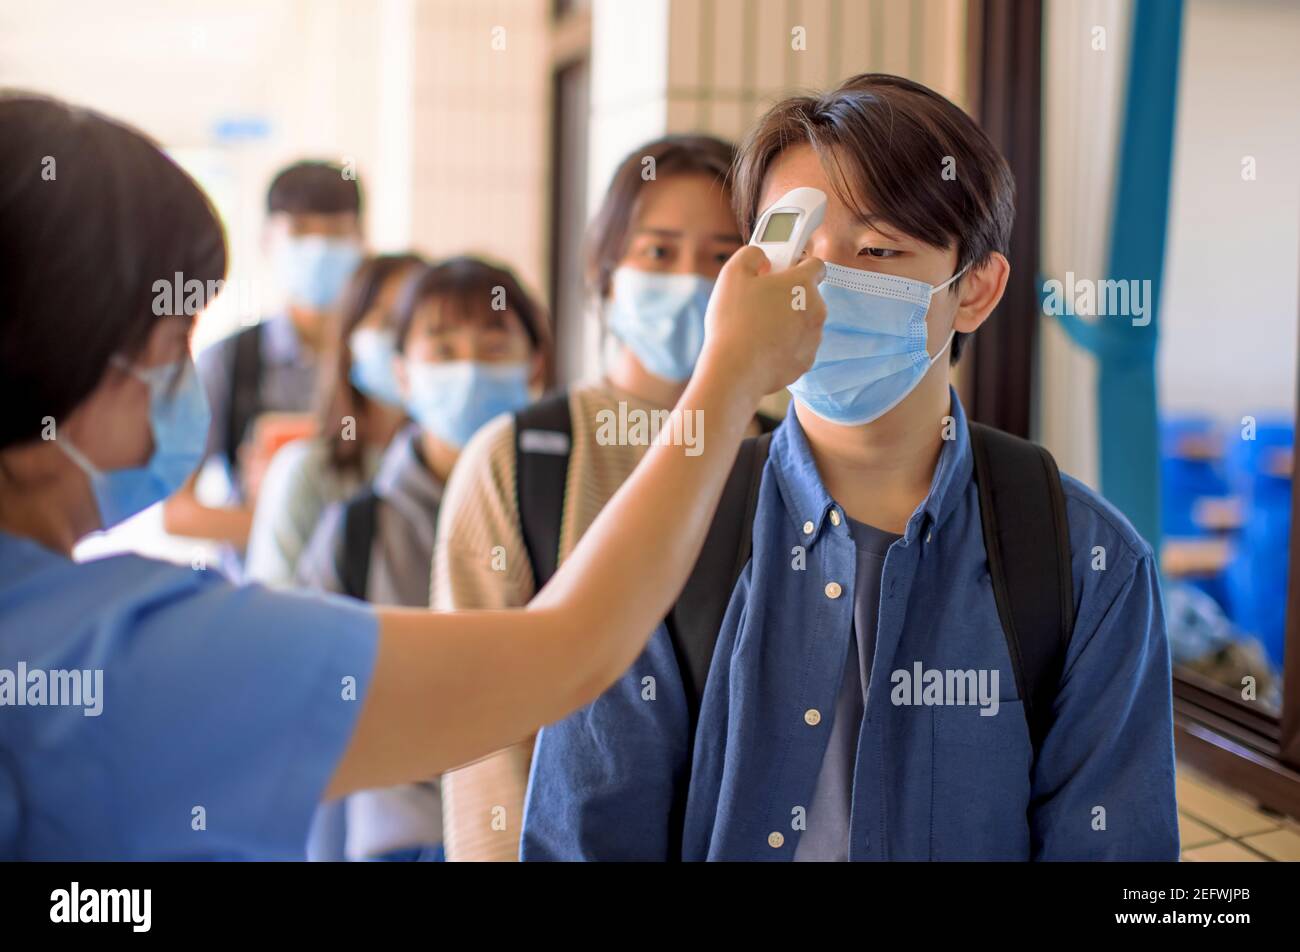 Measure Temperature and medical check at school for covid-19 Stock Photo